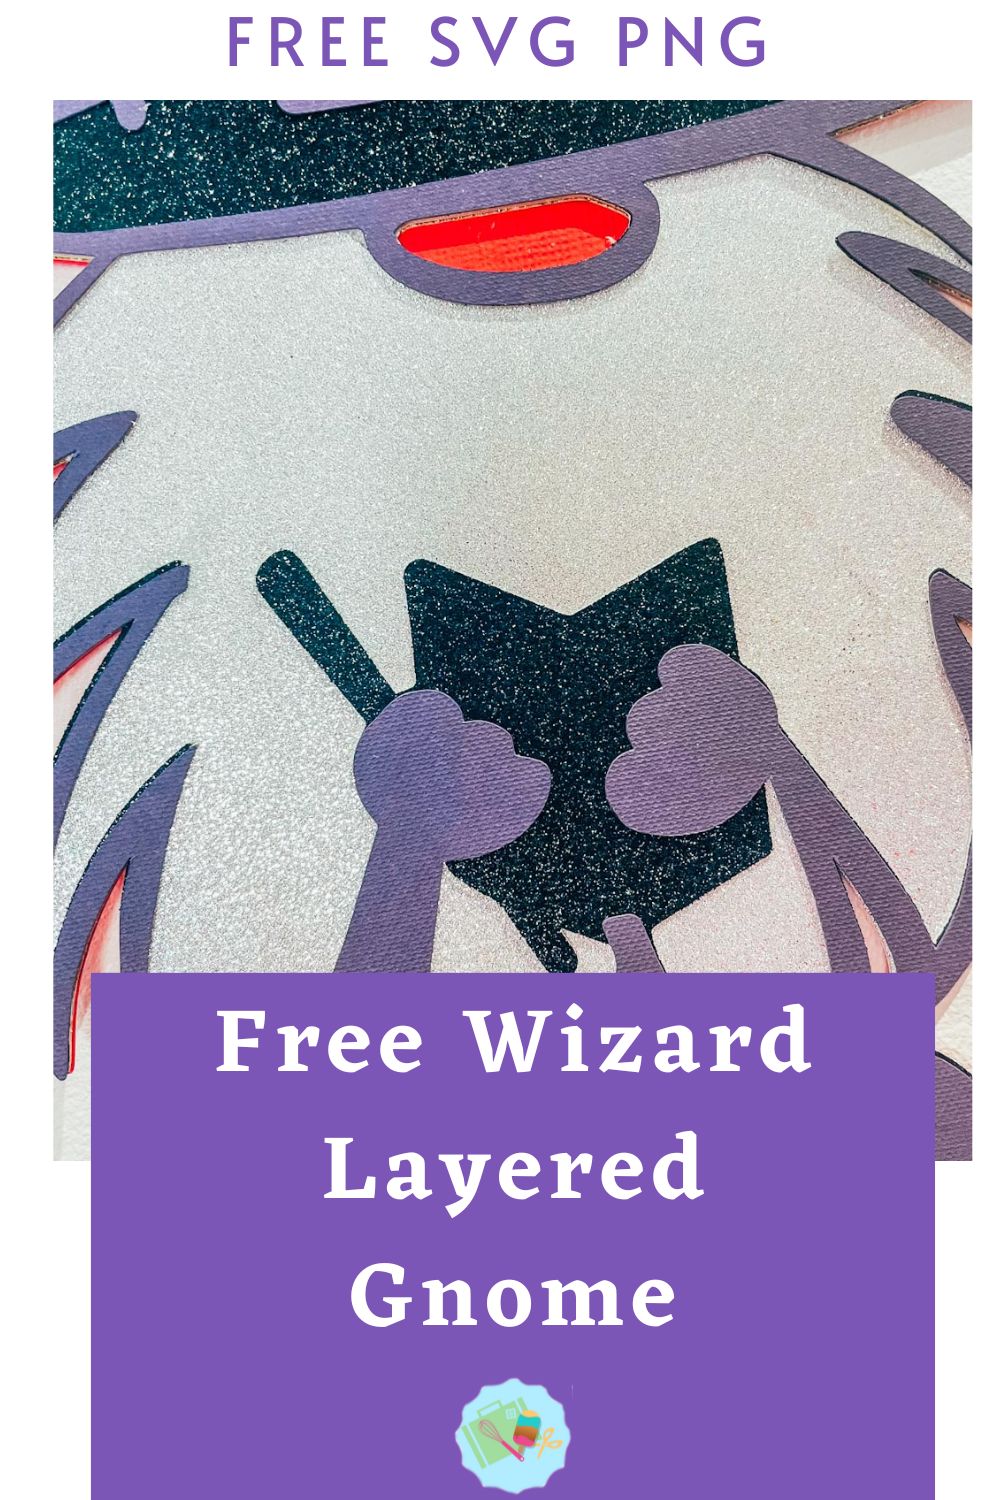 Free Wizard Gnome layered SVG, PNG for Cricut, Glowforge and Silhouette